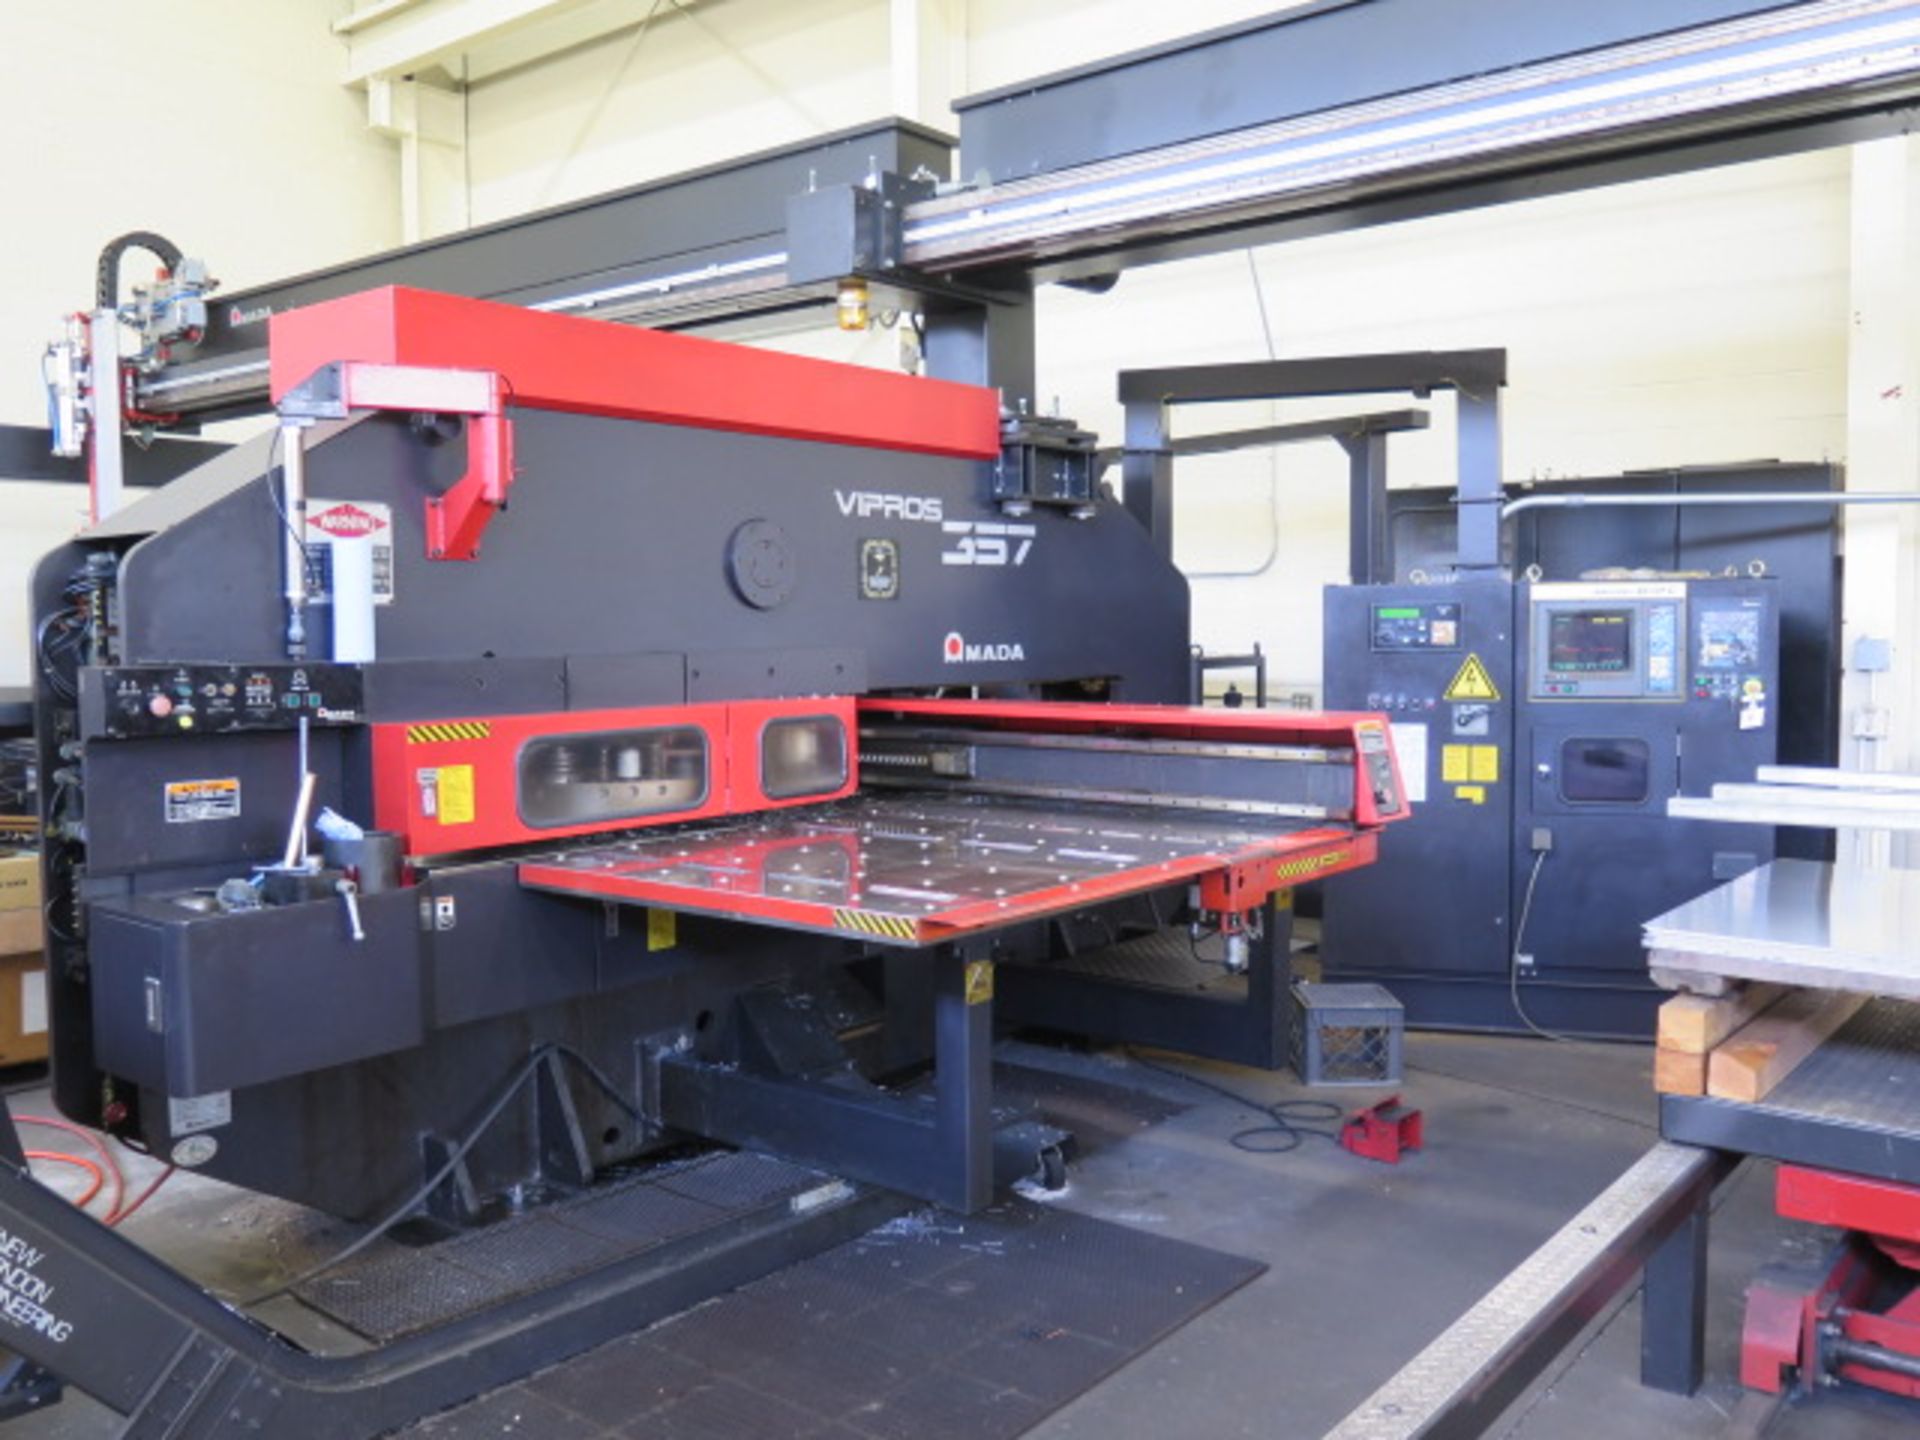 Amada VIPROS 357 30-Ton CNC Turret Punch Cell s/n 35710664 w/ 04P-C Controls, 58-Station, SOLD AS IS - Image 2 of 37